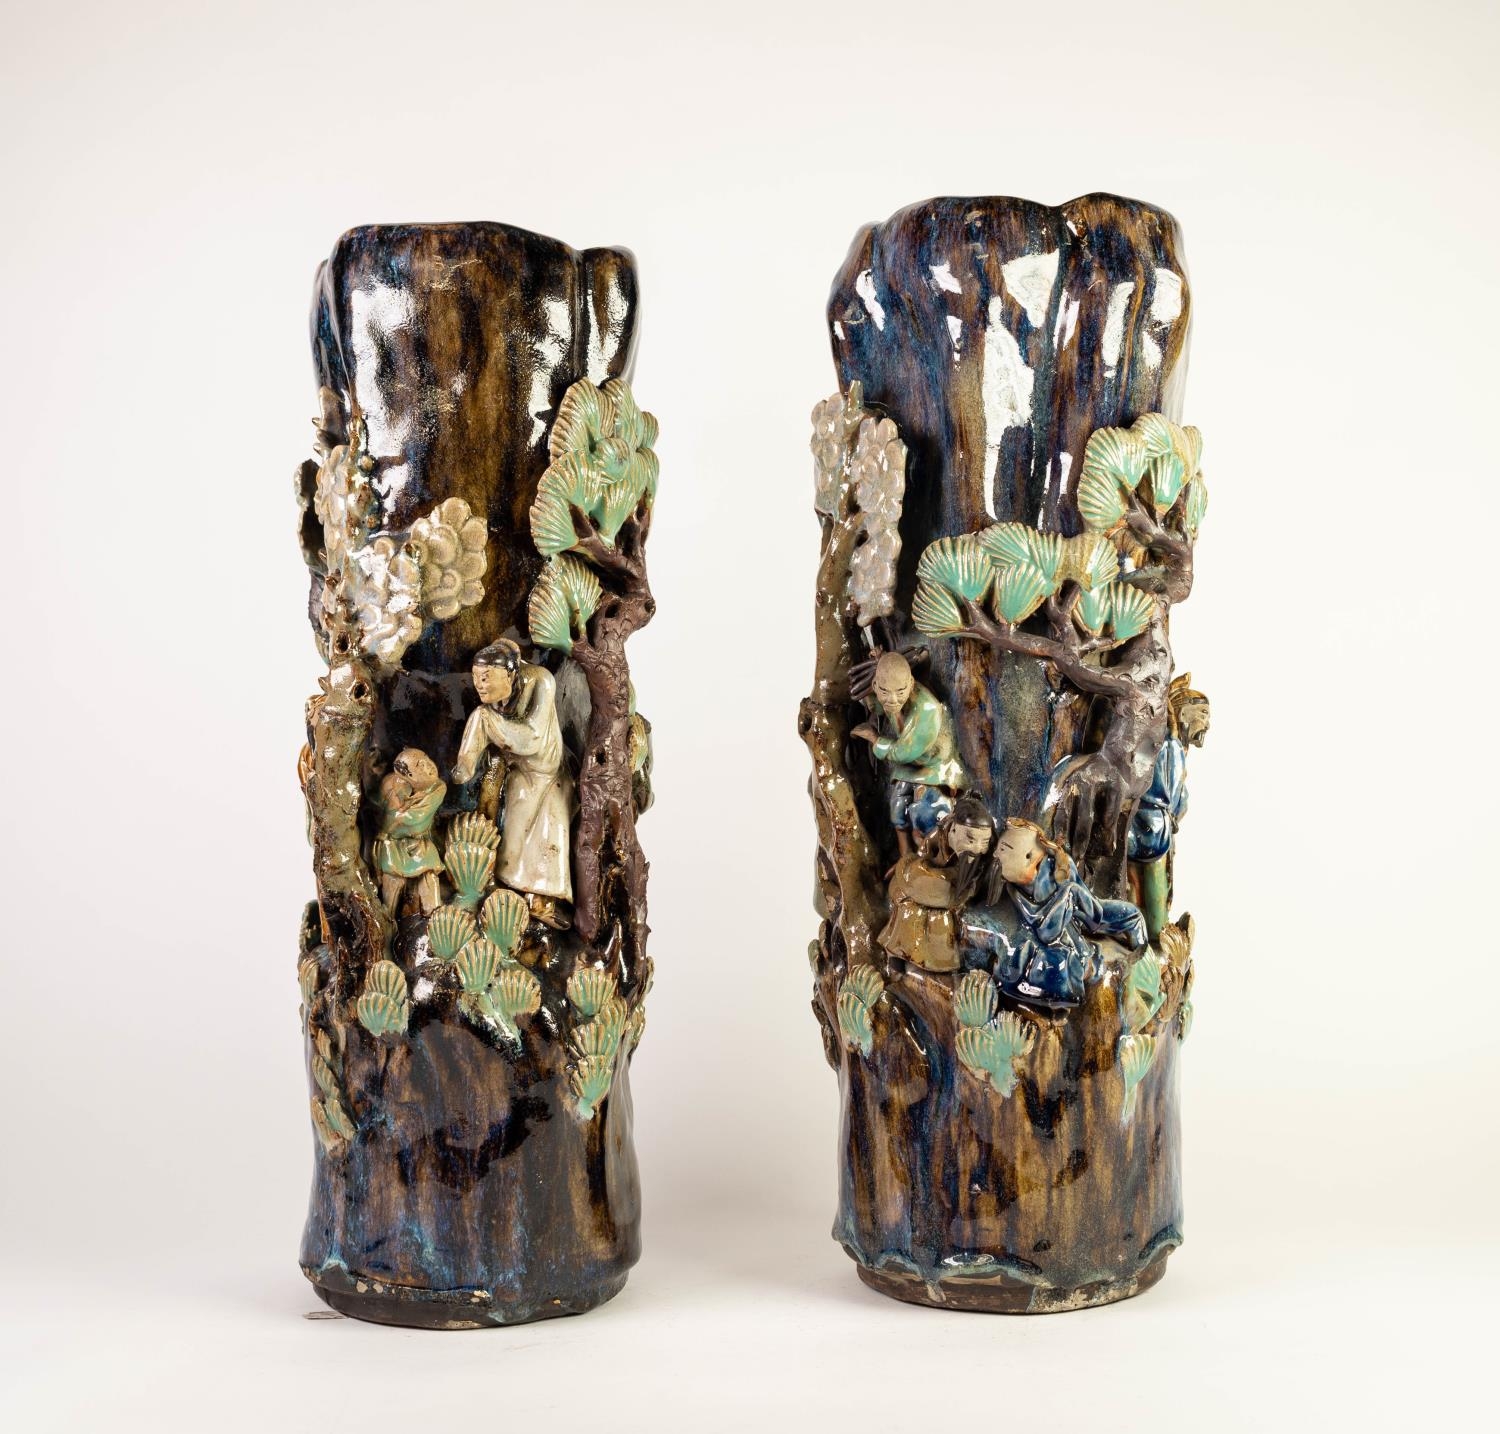 PAIR OF CHINESE LATE QING DYNASTY PROVINCIAL WARE STONEWARE CYLINDRICAL VASES, each sculpted in bold